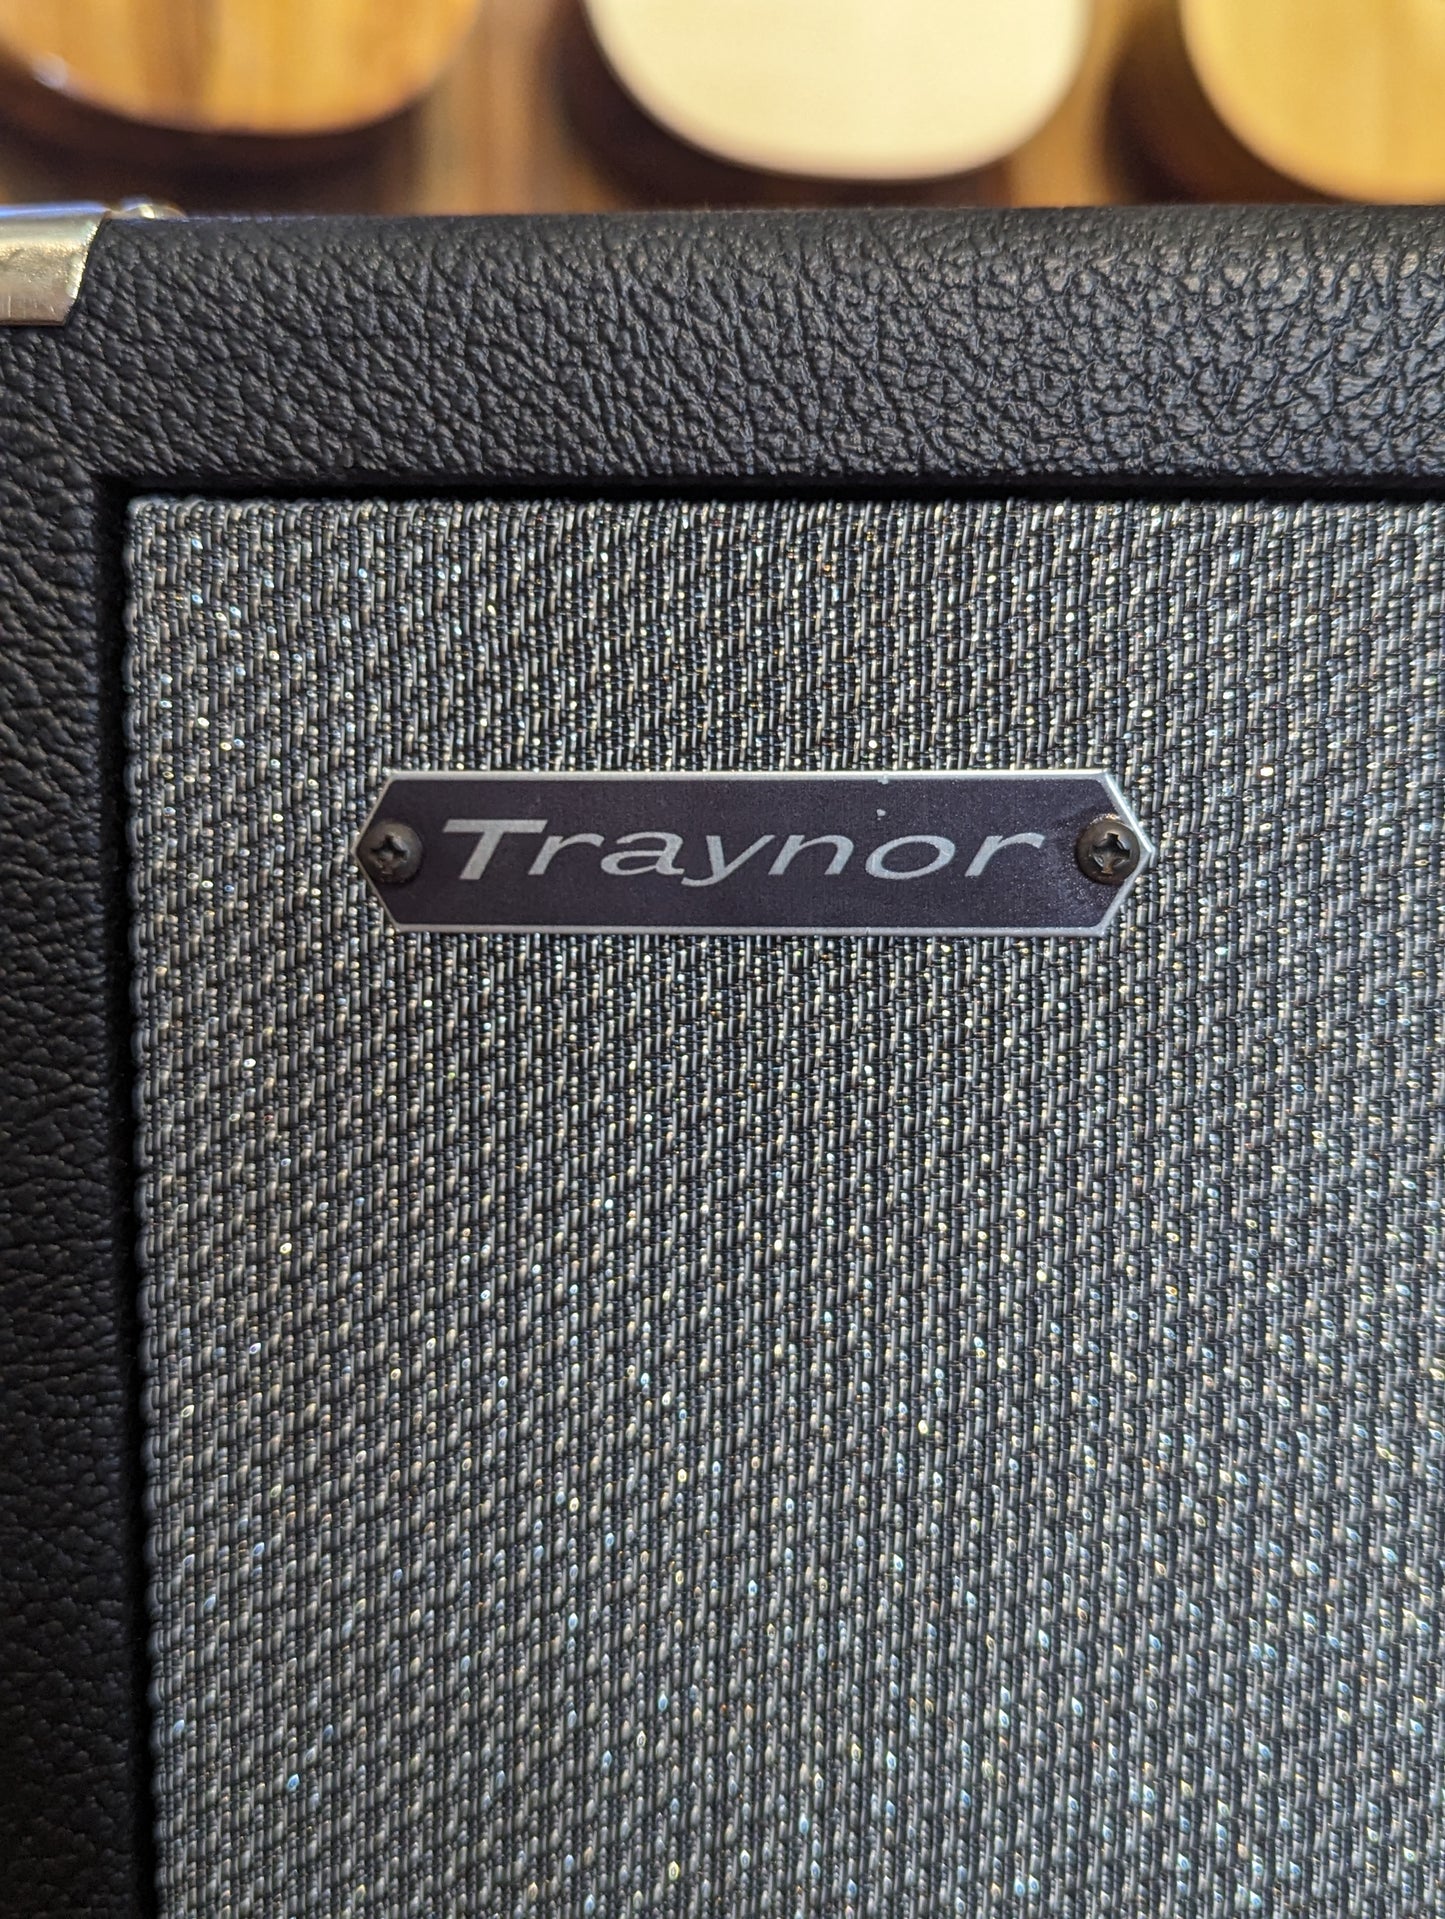 Traynor DarkHorse Series 50w 2x12 Guitar Extension Cabinet (Used)